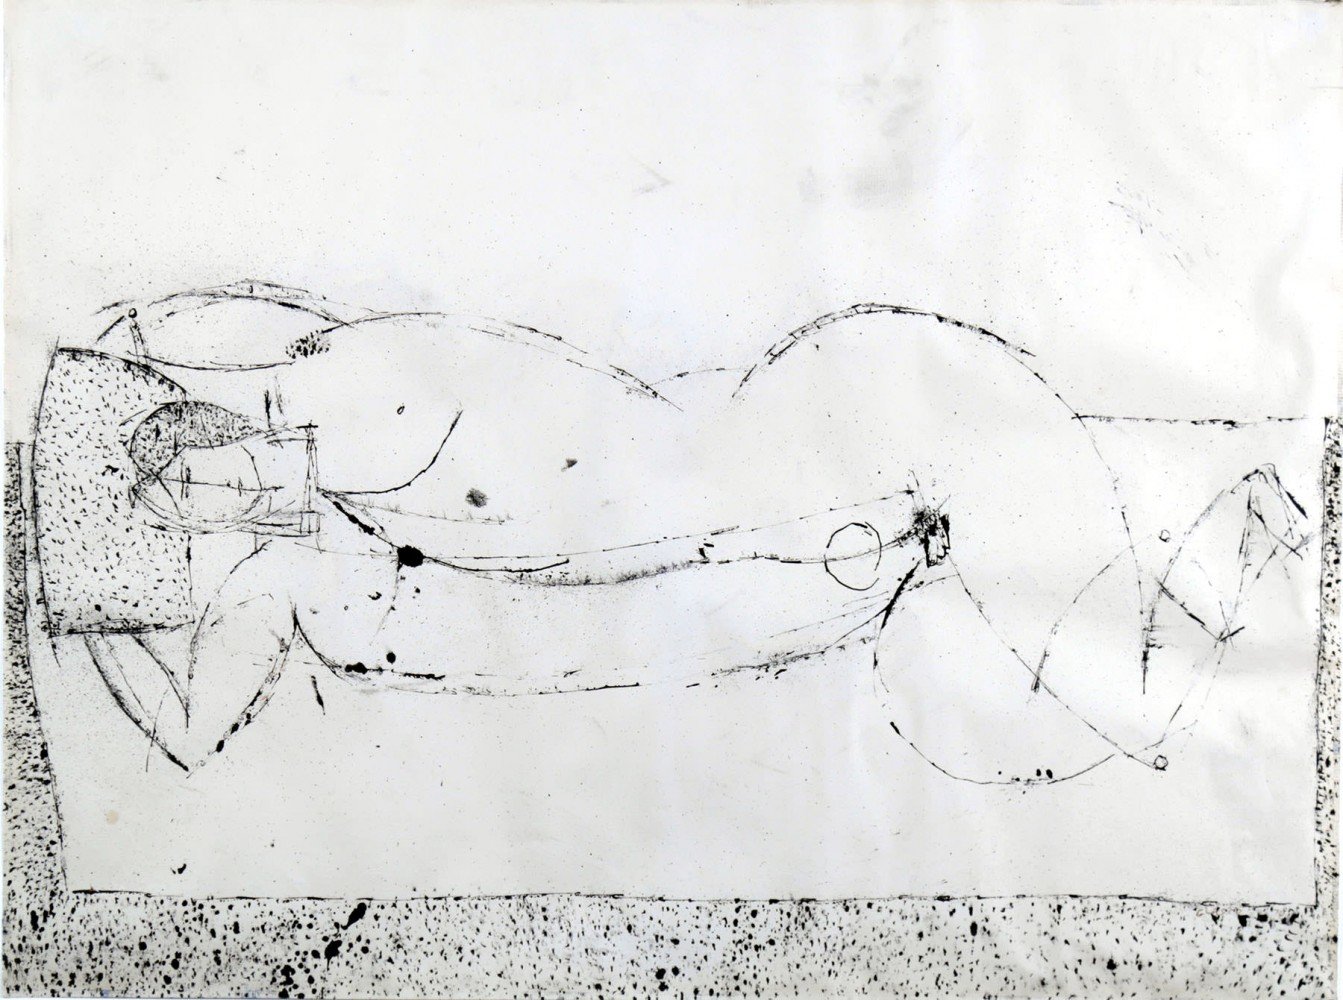 Abstract Figurative Pen and Ink on Paper Drawing: 